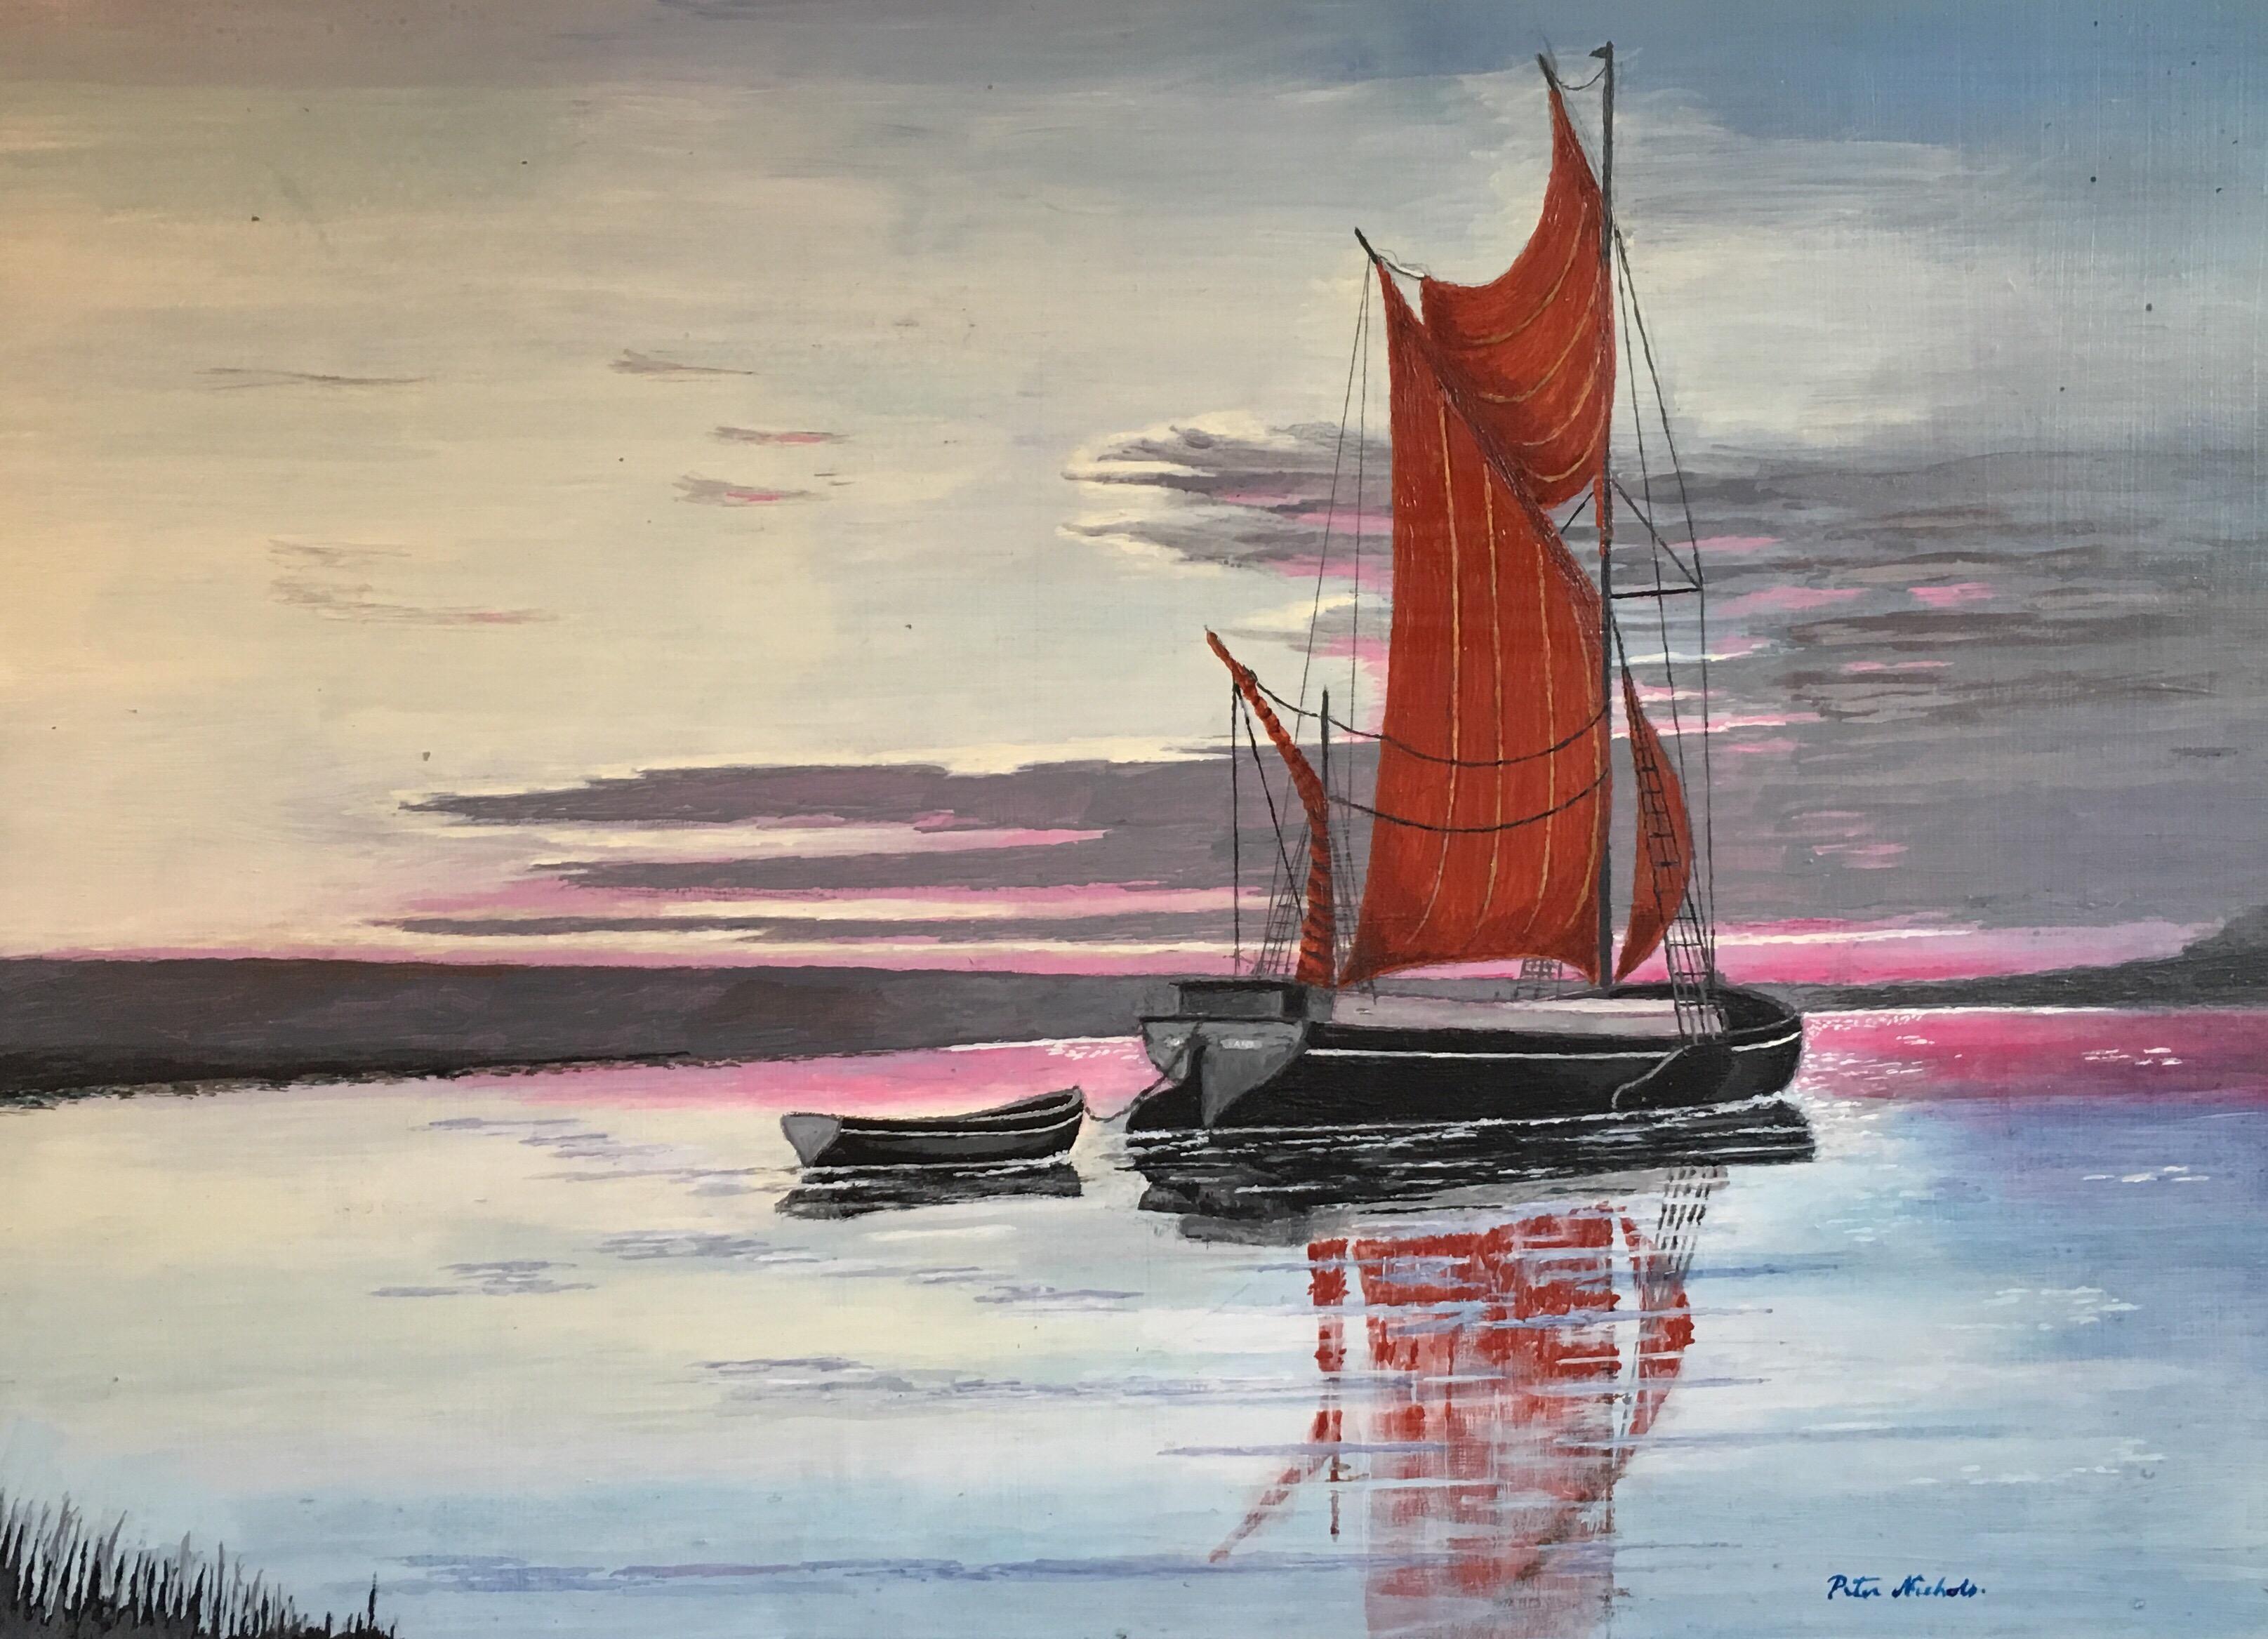 Peter Nichols Landscape Painting - The Red Sail, Sunset Nautical Landscape Large Signed Oil Painting